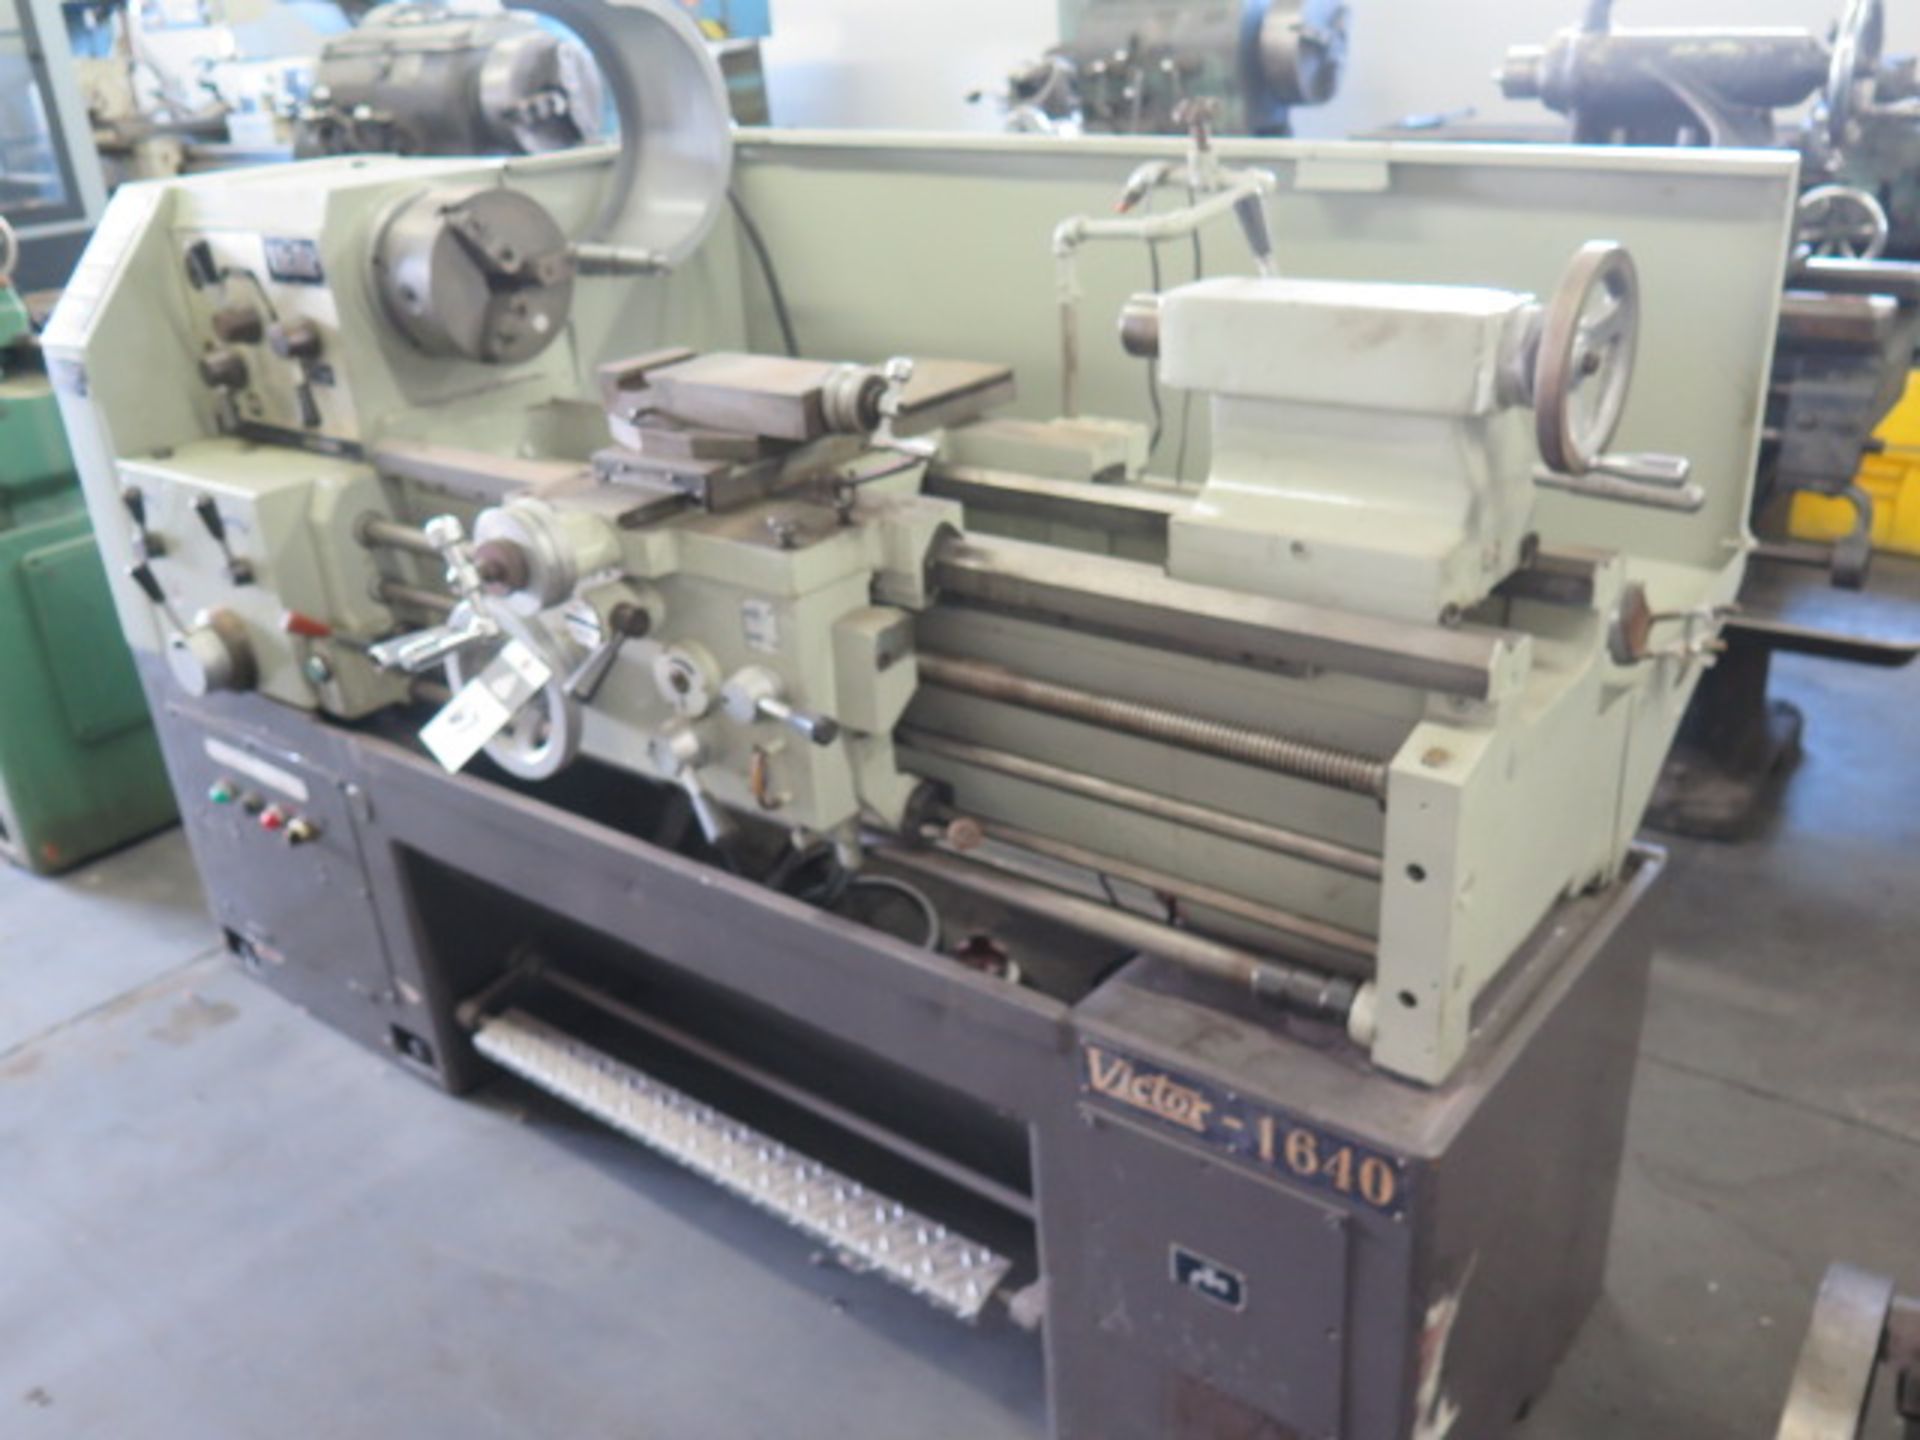 Victor 1640 16” x 40” Geared Gap Bed Lathe s/n 460583 w/ 65-1800 RPM, Taper Attachment, SOLD AS IS - Image 2 of 11